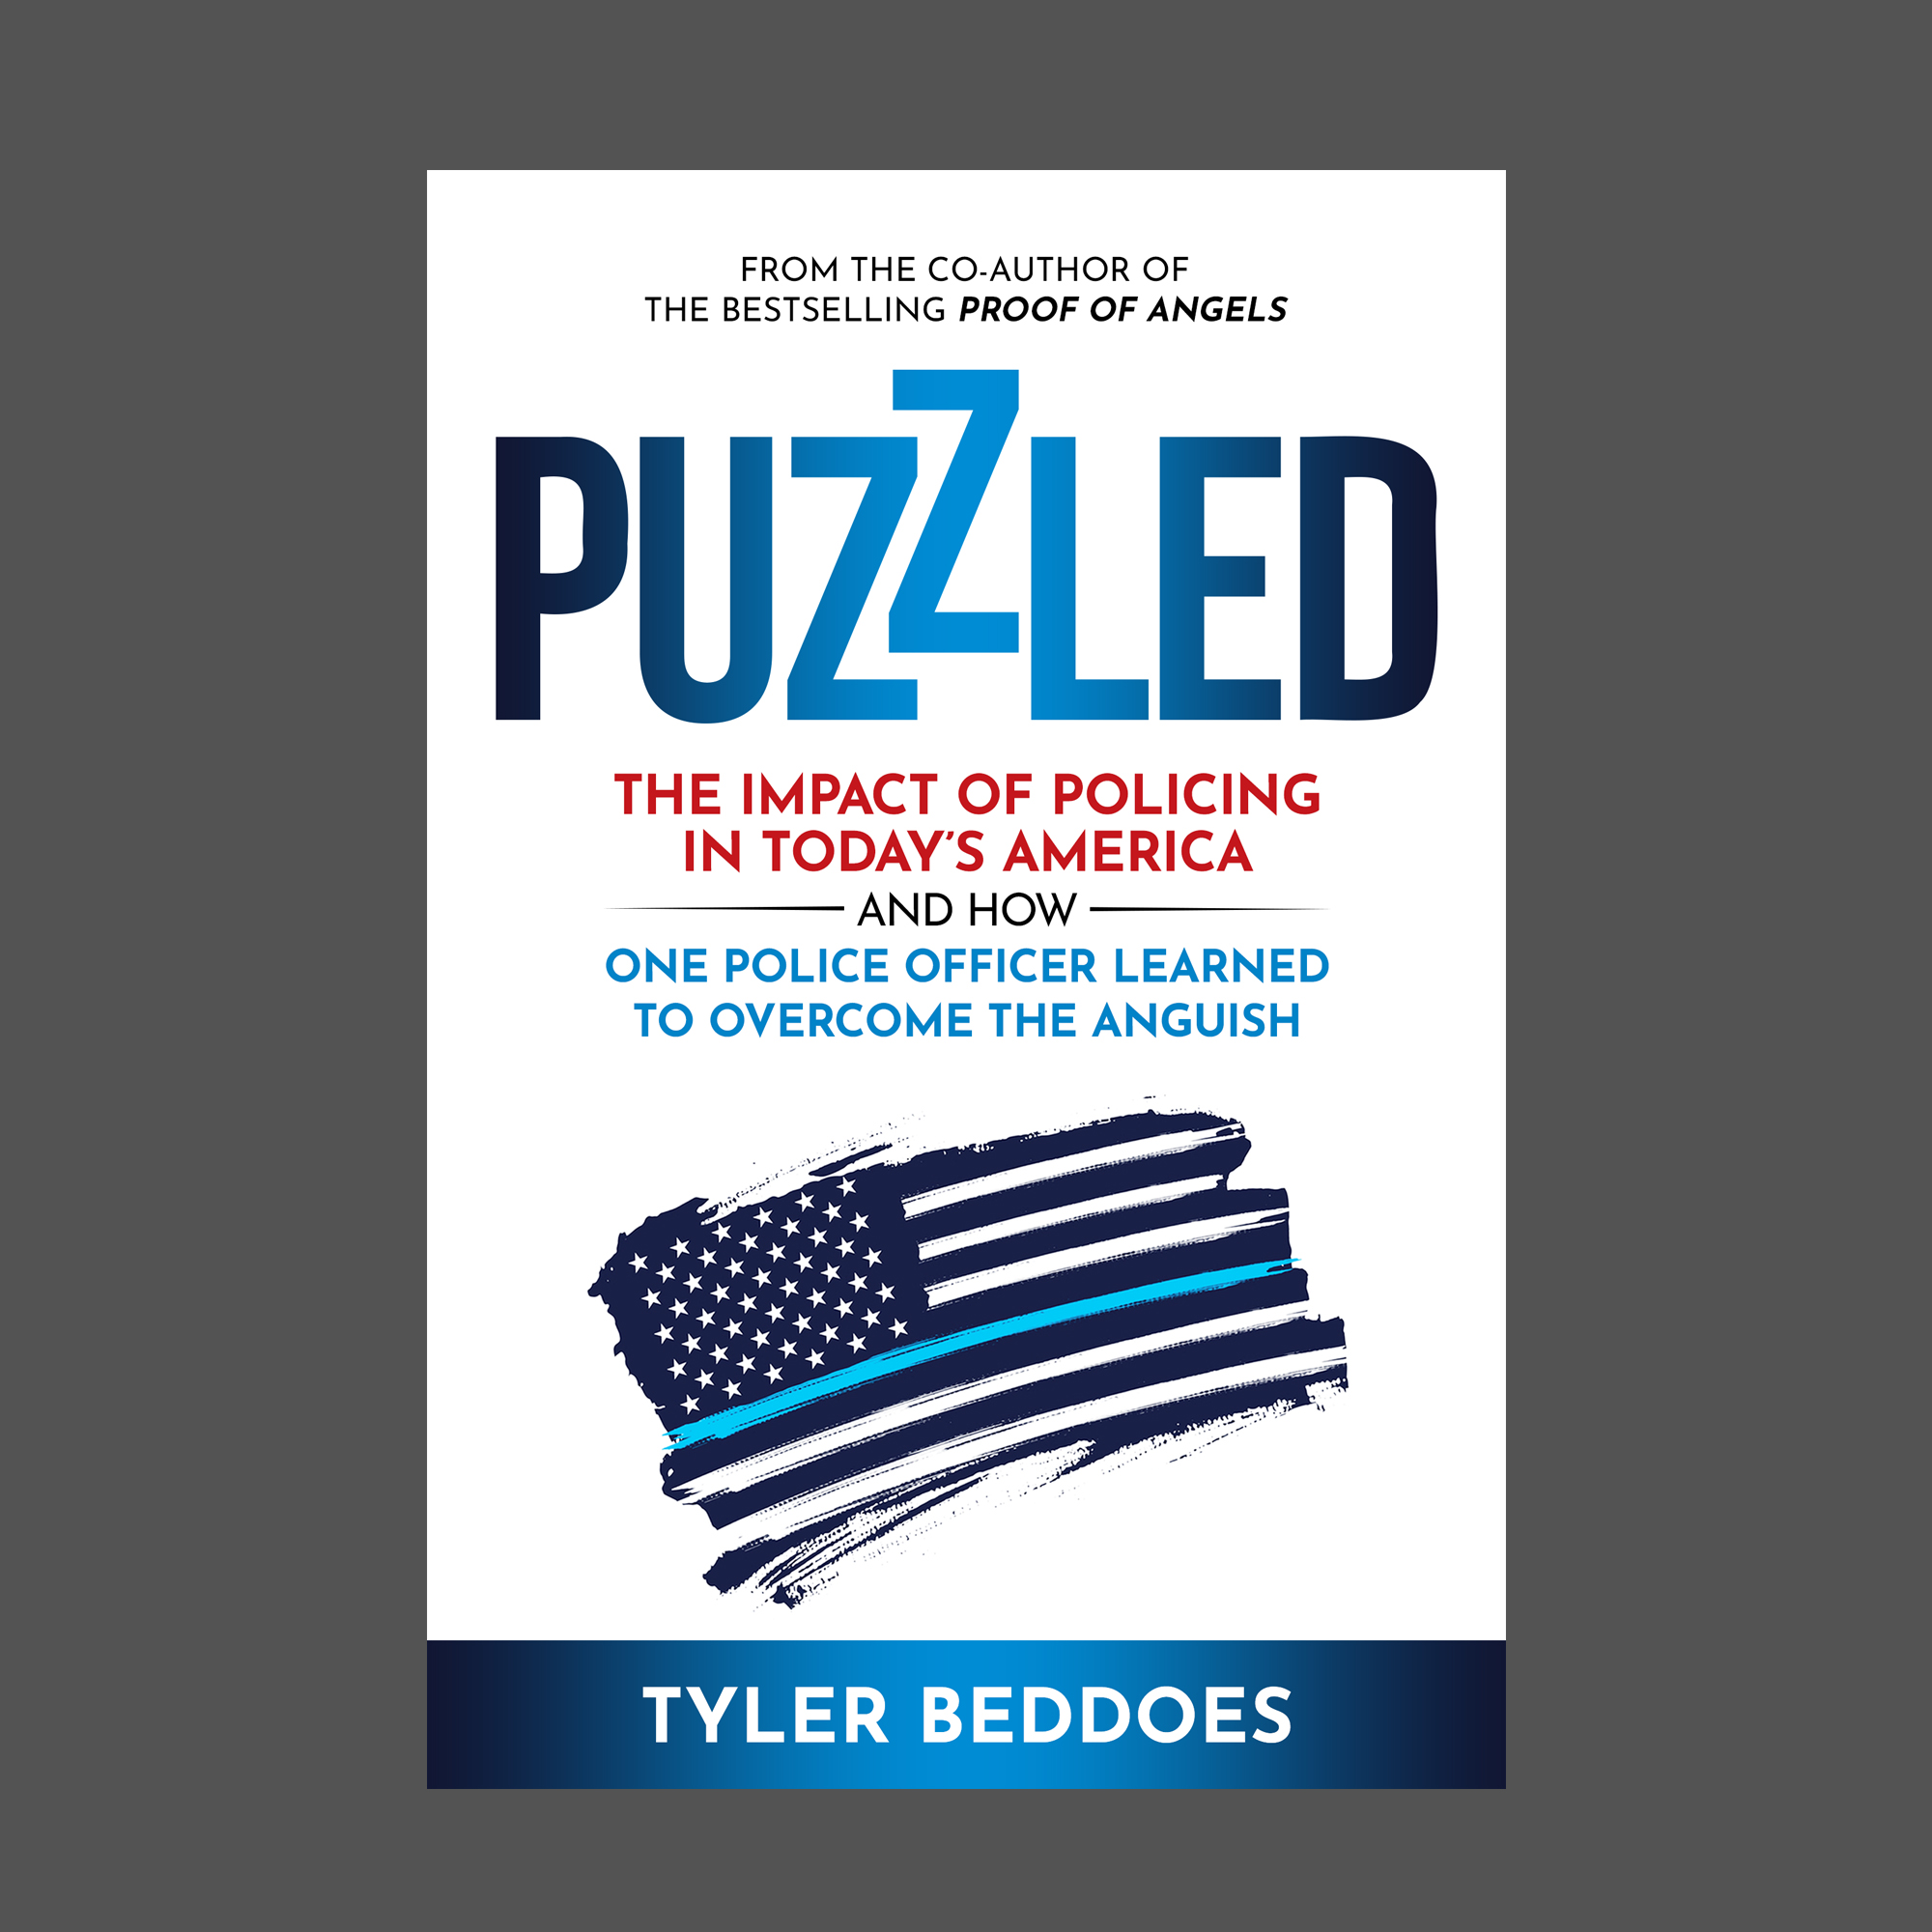 Bestselling Author Tyler Beddoes Releases New Book "Puzzled"